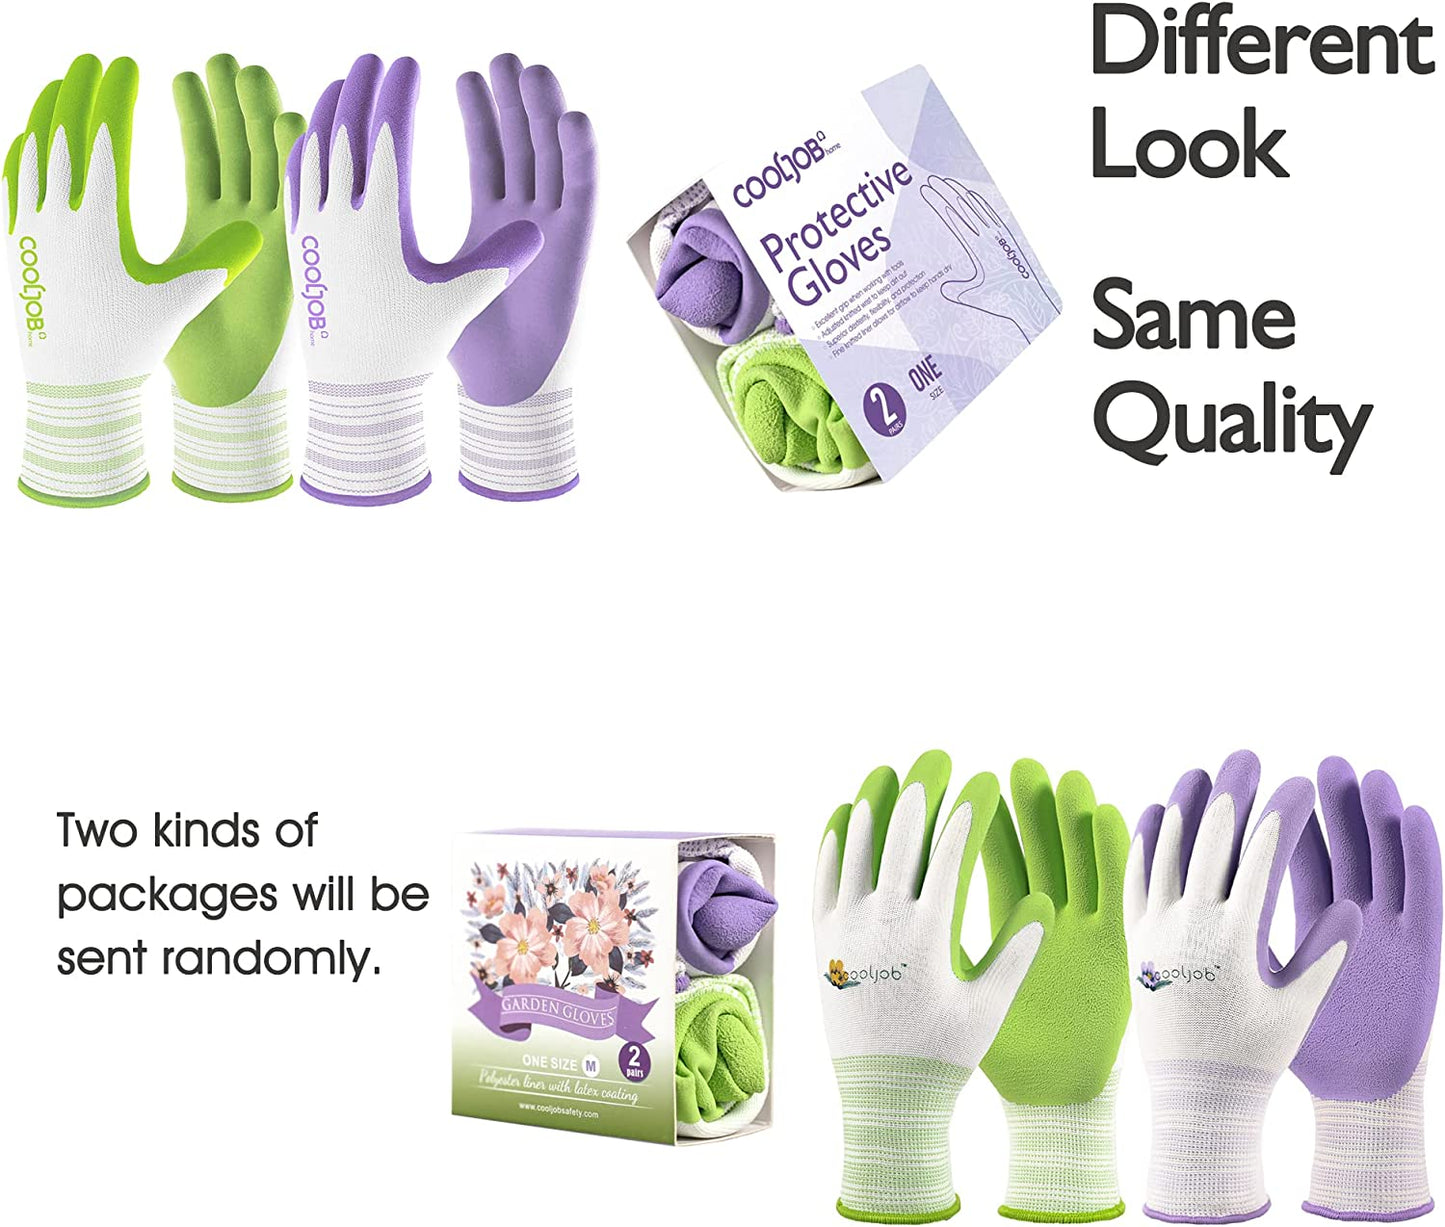 Gardening Gloves for Women and Ladies, 2 Pairs Breathable Rubber Coated Yard Garden Gloves, Outdoor Protective Work Gloves with Grip, Medium Size Fits Most, Lavender Purple & Apple Green